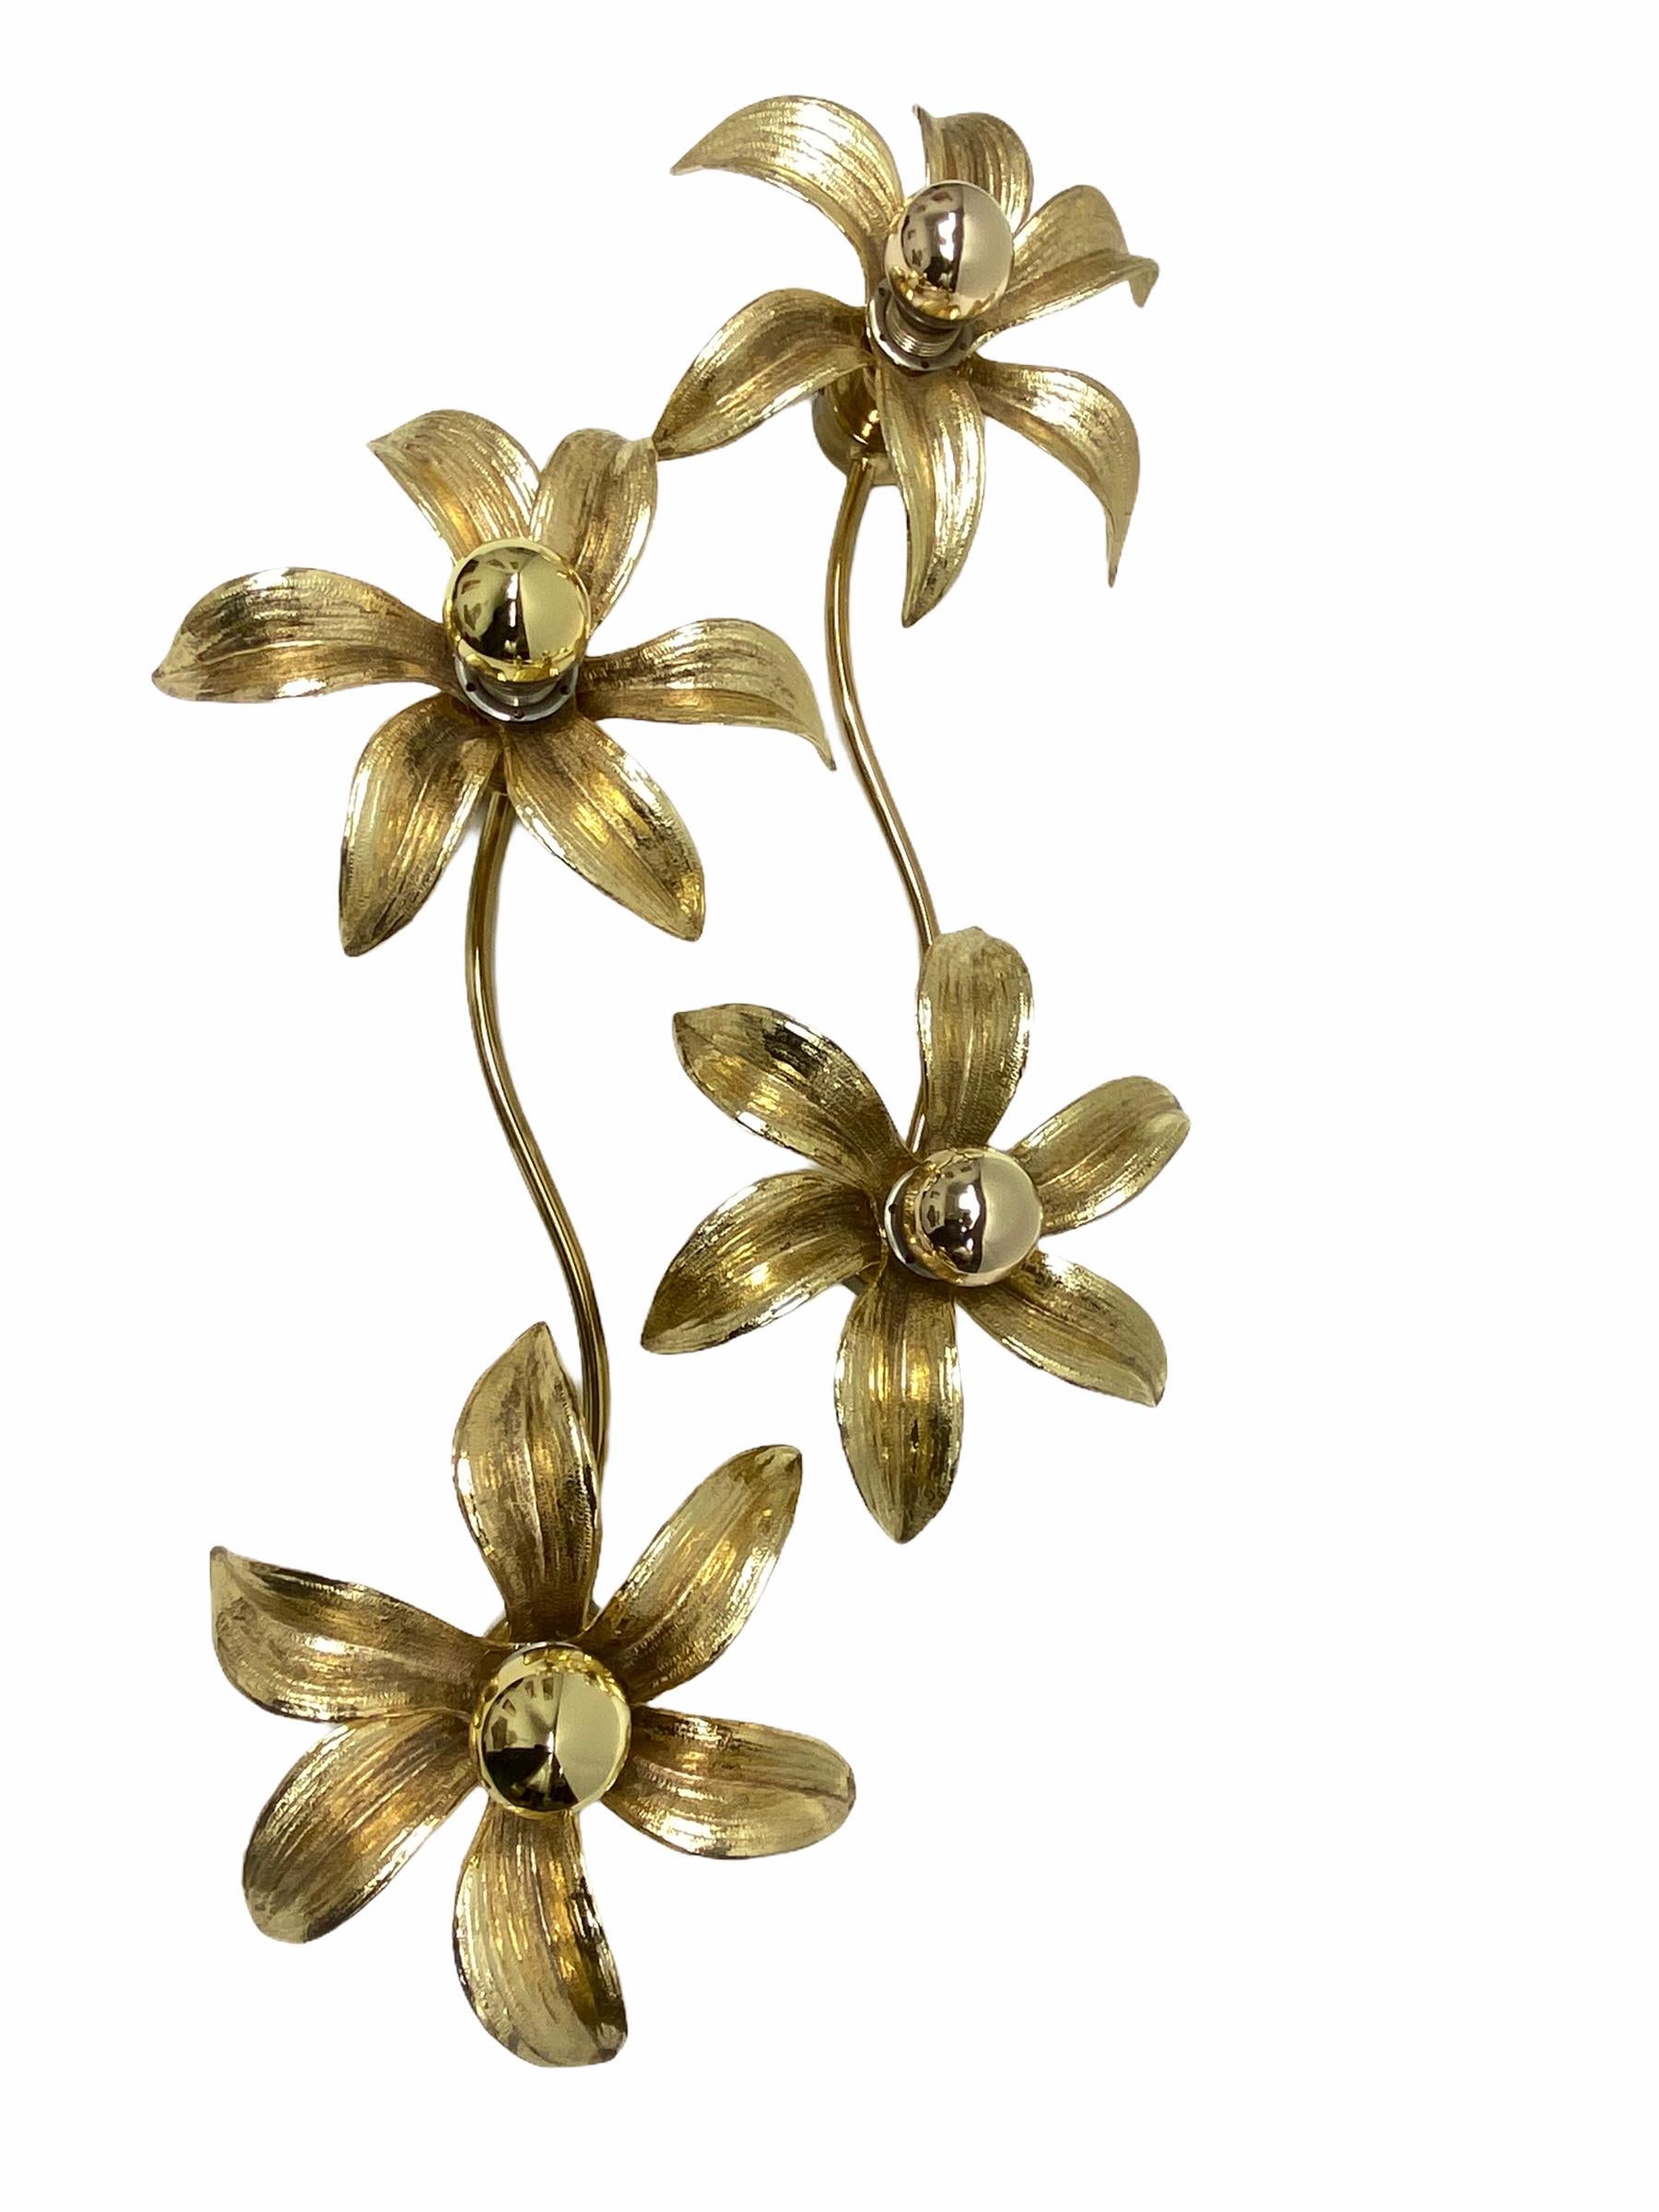 A pair of elegant Willy Daro flower light for ‘Massive Lighting', 1970s. Cast brass flower wall or ceiling light, the light attaches by a plate so can be used either way. The light is wired and in full working order, but as with all our lighting we